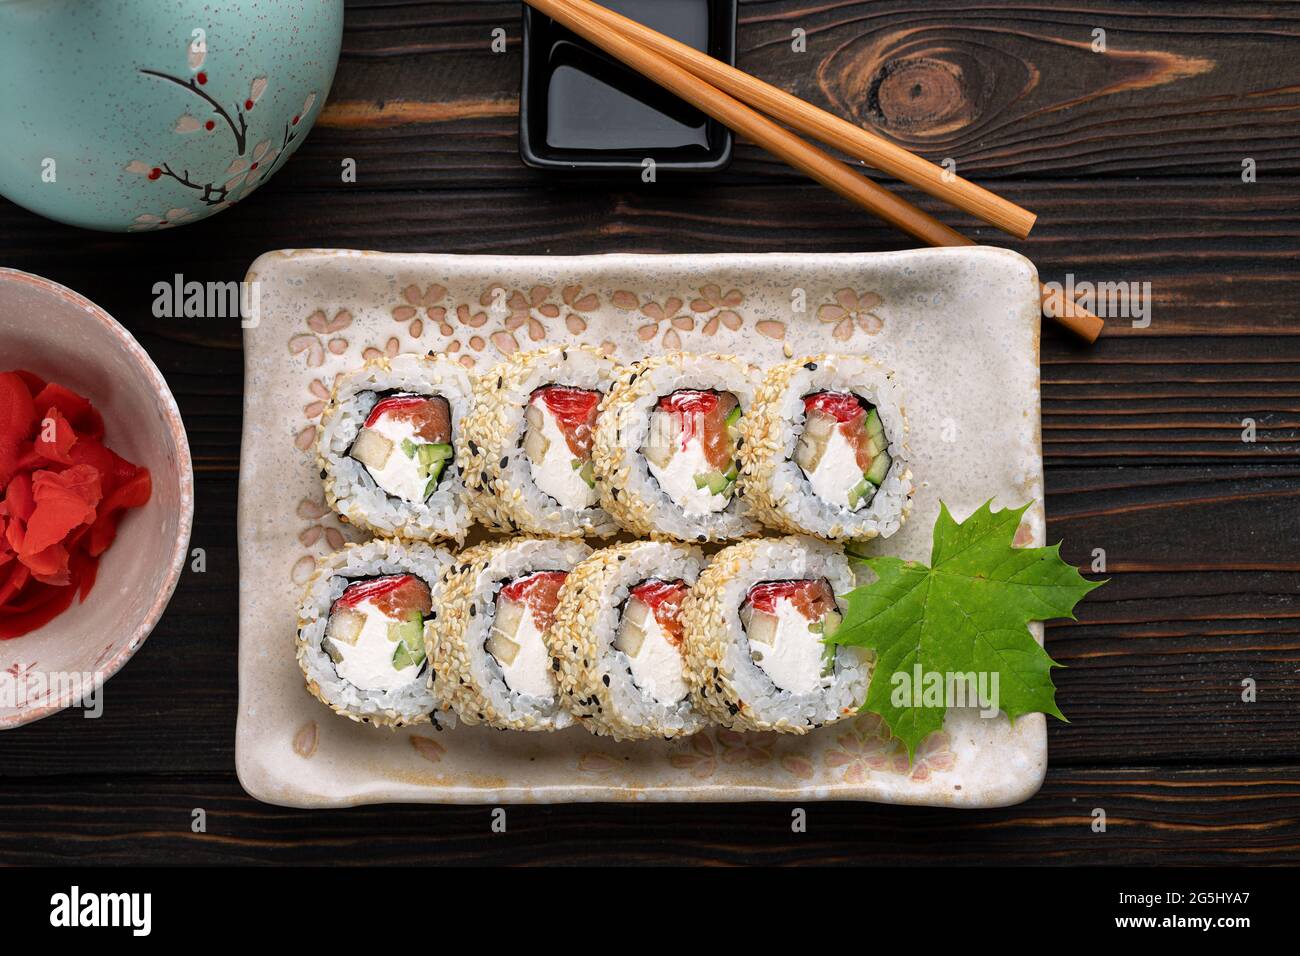 Set of sushi rolls with cream cheese, rice and salmon on a board decorated with ginger on a dark wooden background. Japanese cuisine. Food photo Stock Photo